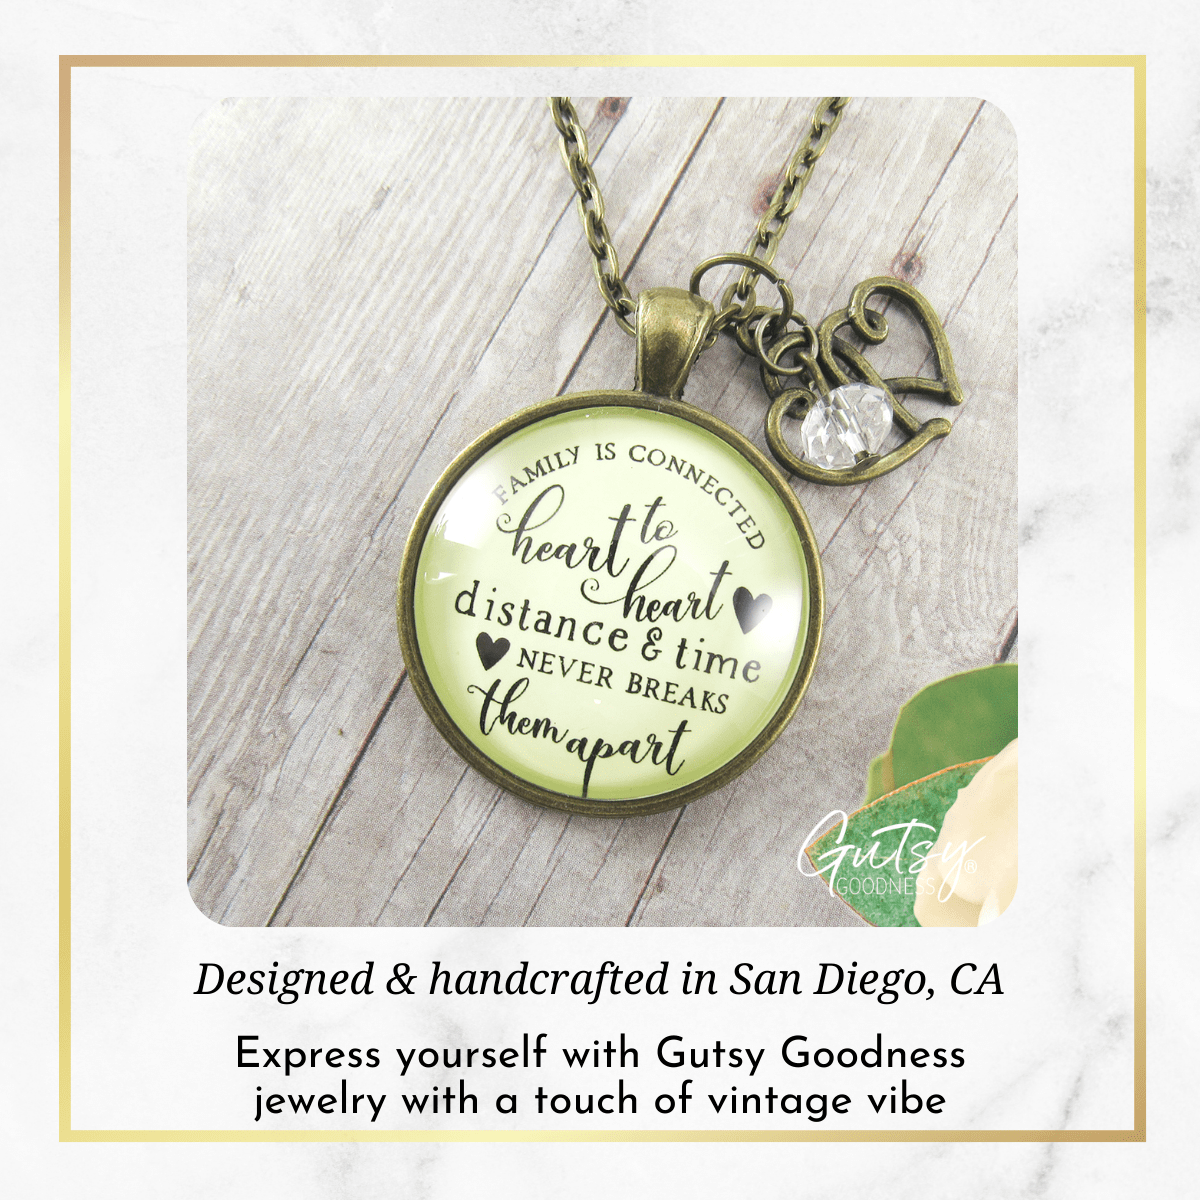 Gutsy Goodness Family is Connected Heart to Heart Necklace Families Together Jewelry - Gutsy Goodness Handmade Jewelry;Family Is Connected Heart To Heart Necklace Families Together Jewelry - Gutsy Goodness Handmade Jewelry Gifts